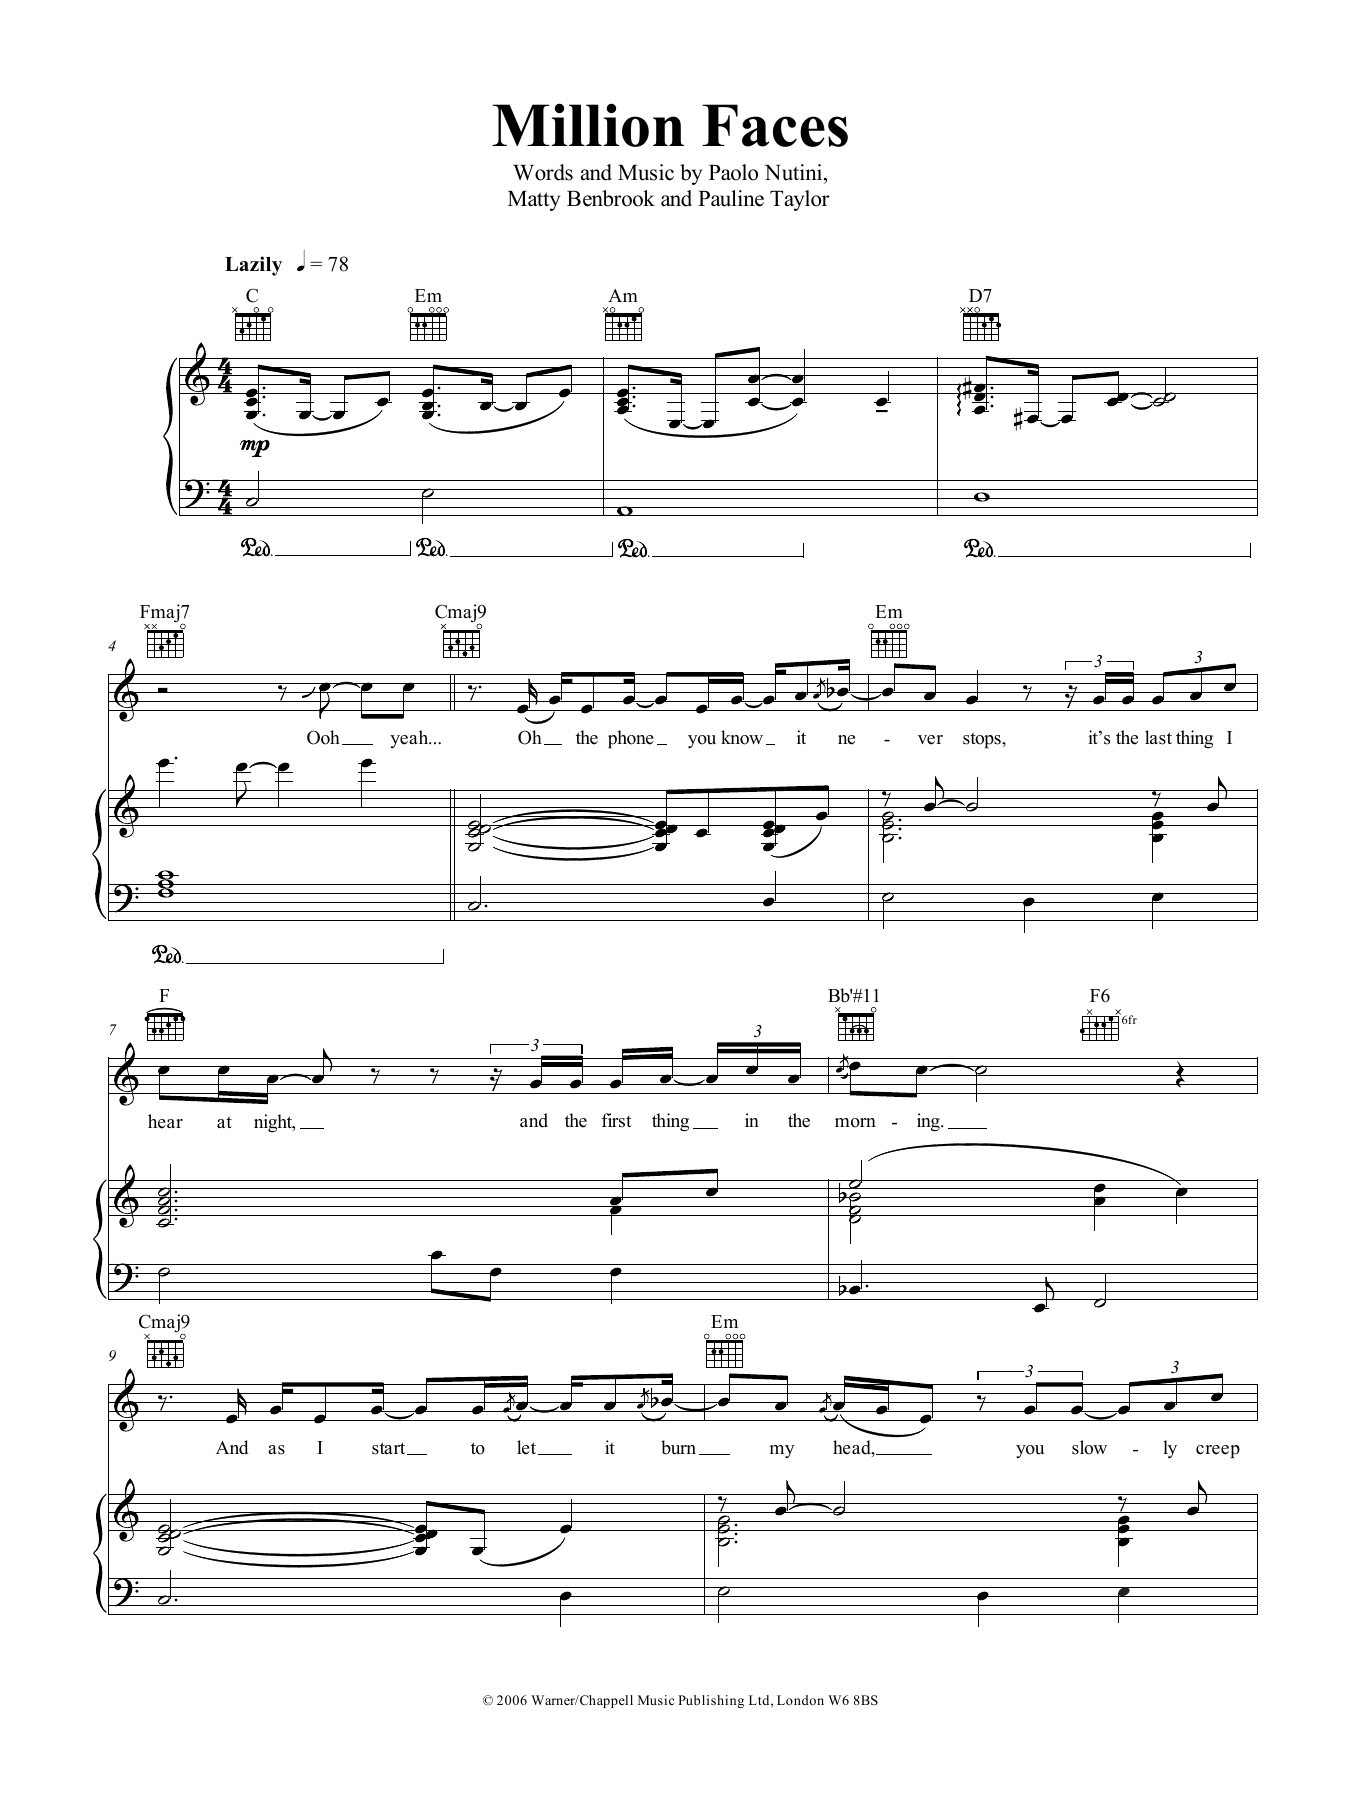 Download Paolo Nutini Million Faces Sheet Music